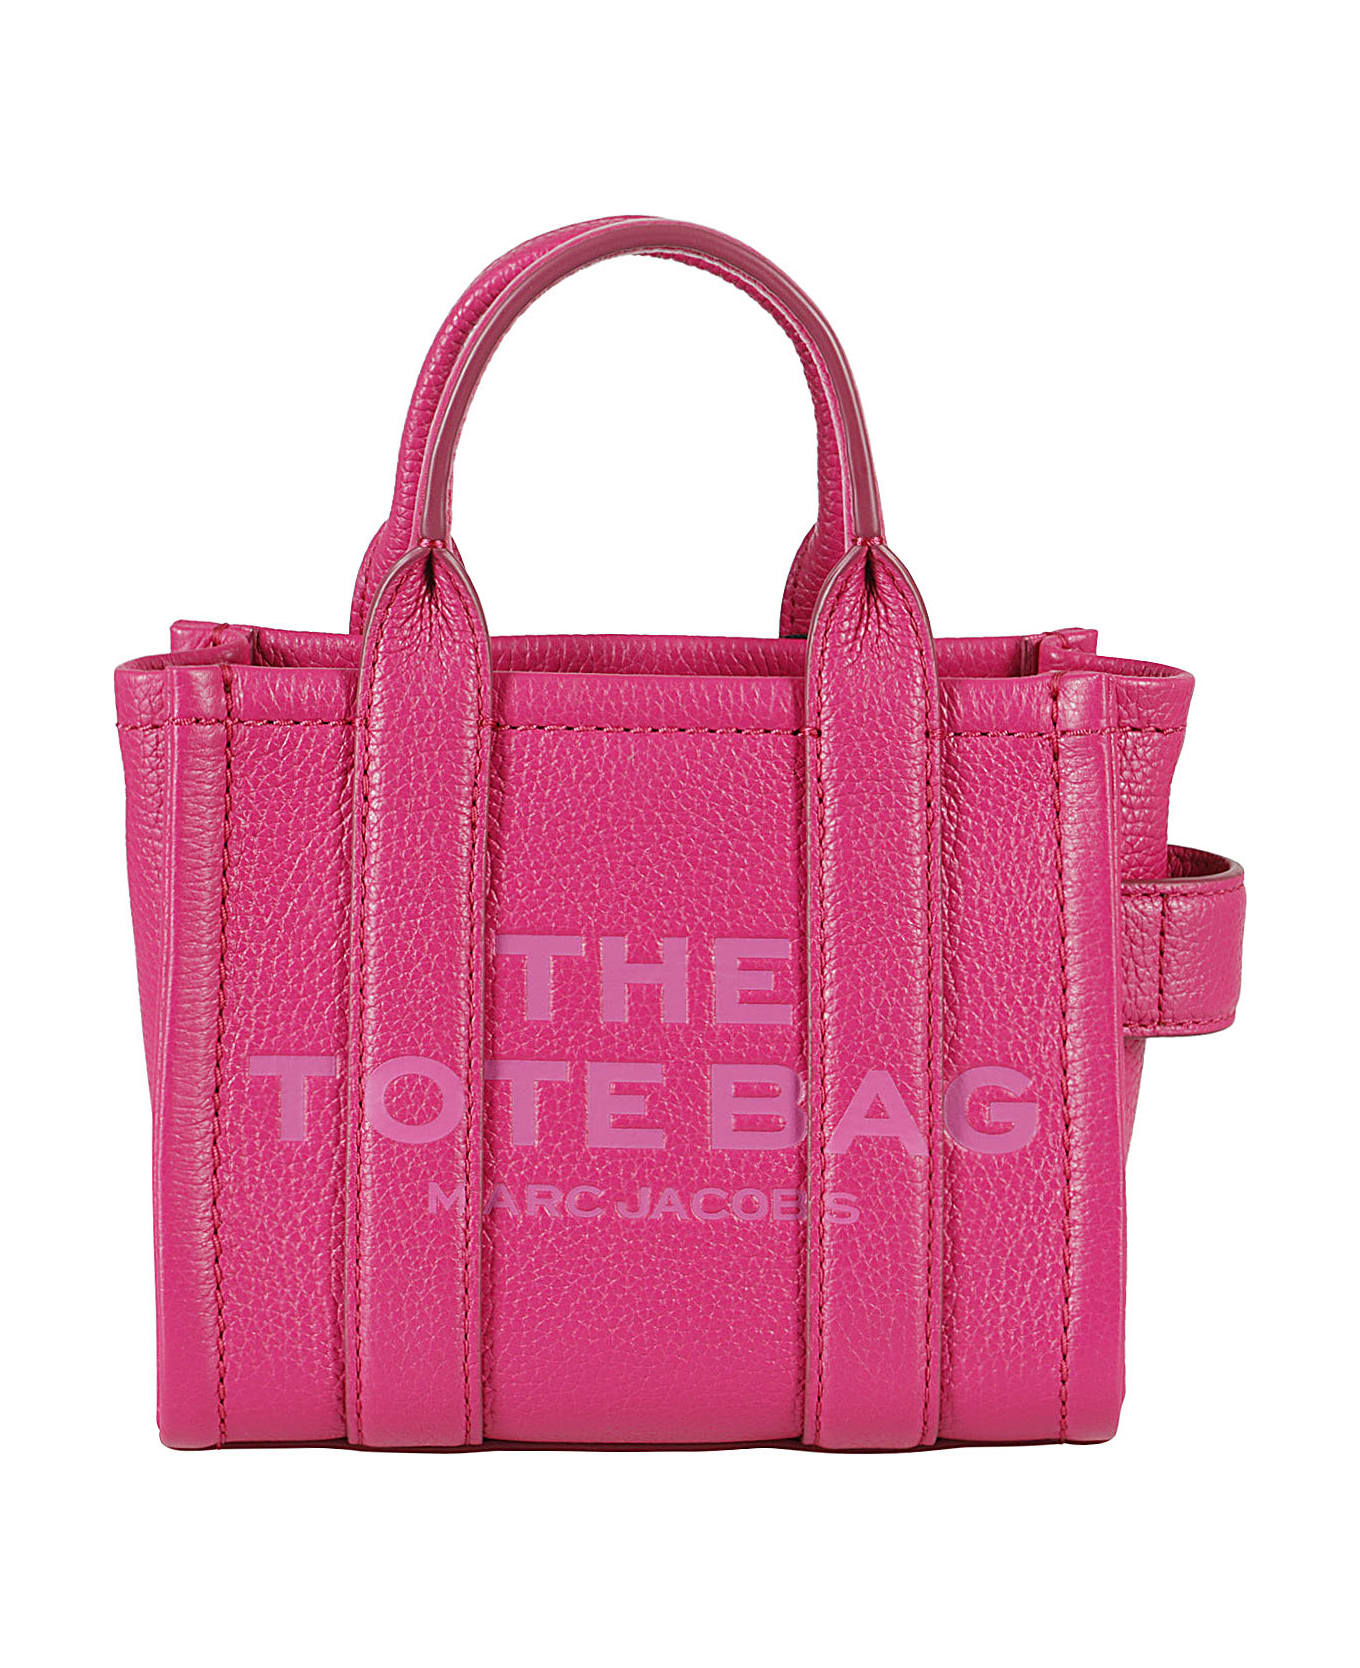 Marc Jacobs The Mini Tote - Lipstick Pink トートバッグ